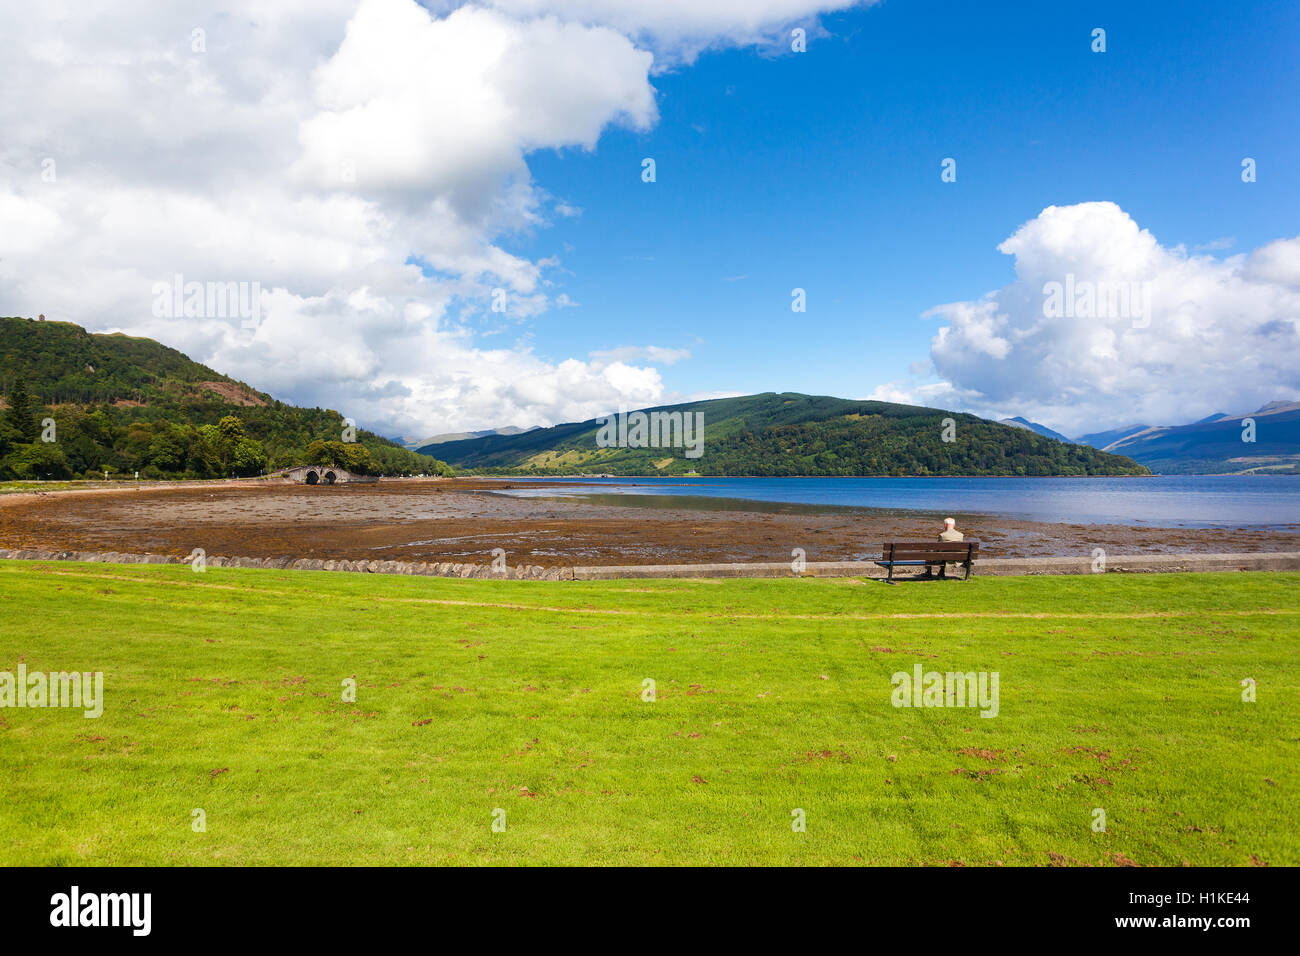 Lonely elderly man sitting on the bench and watching the lake. Stock Photo